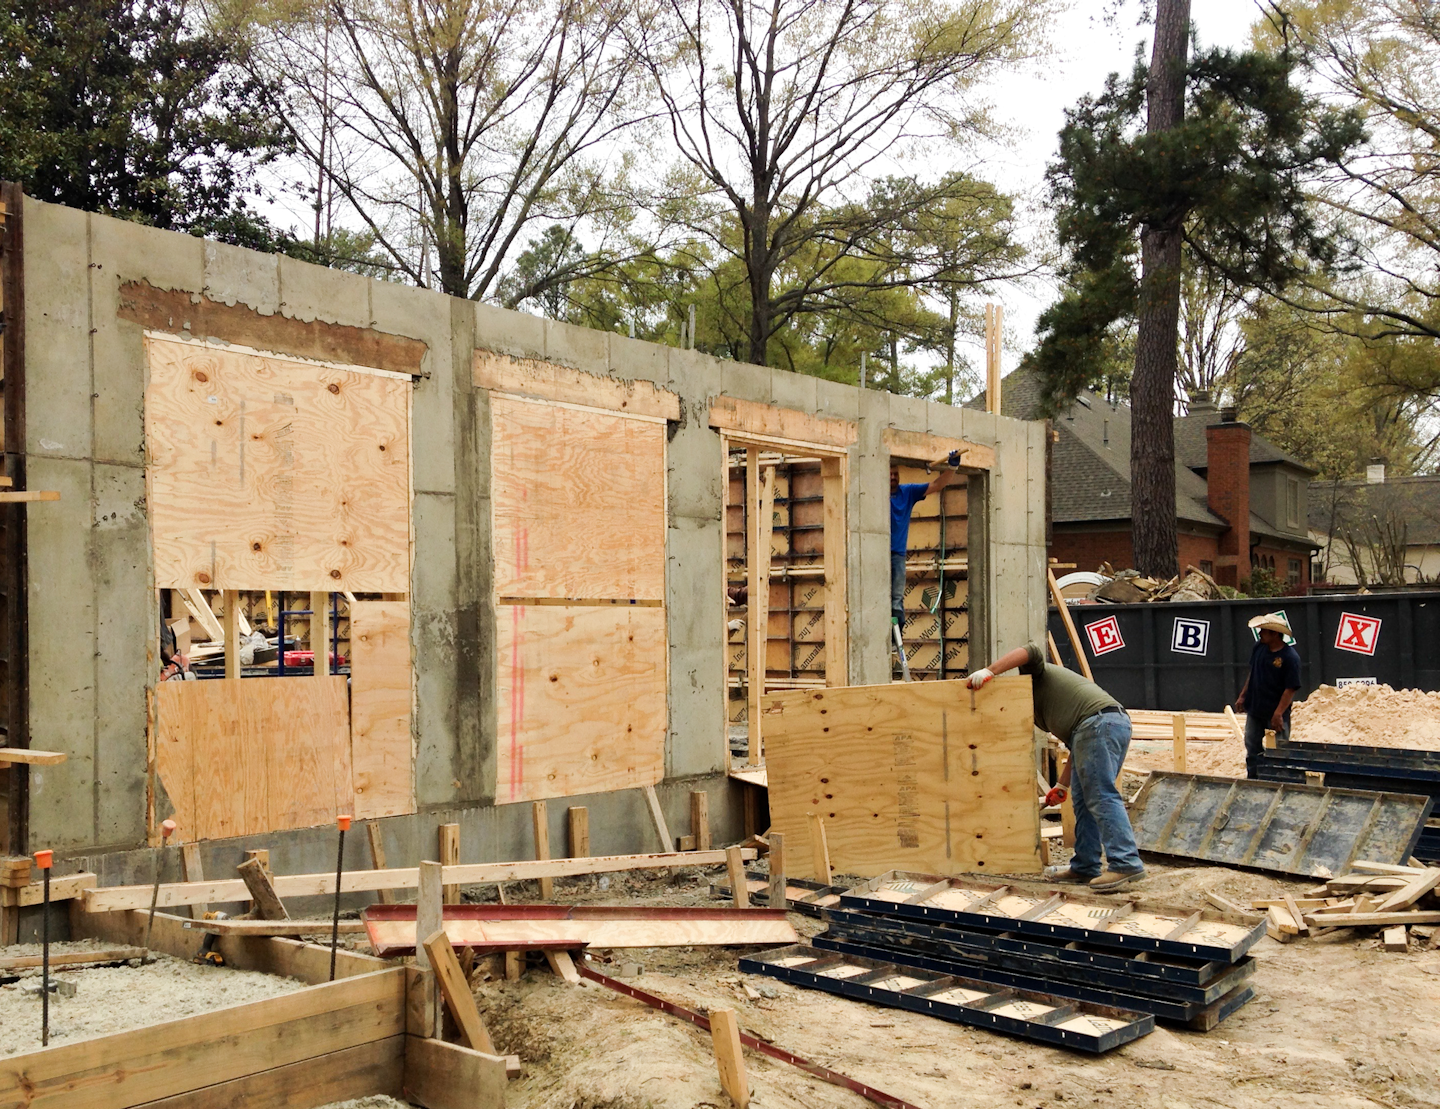 By concentrating on the exterior walls of homes as a subcontractor Tabor hopes to complete work on over 300 homes in the 2019 season.